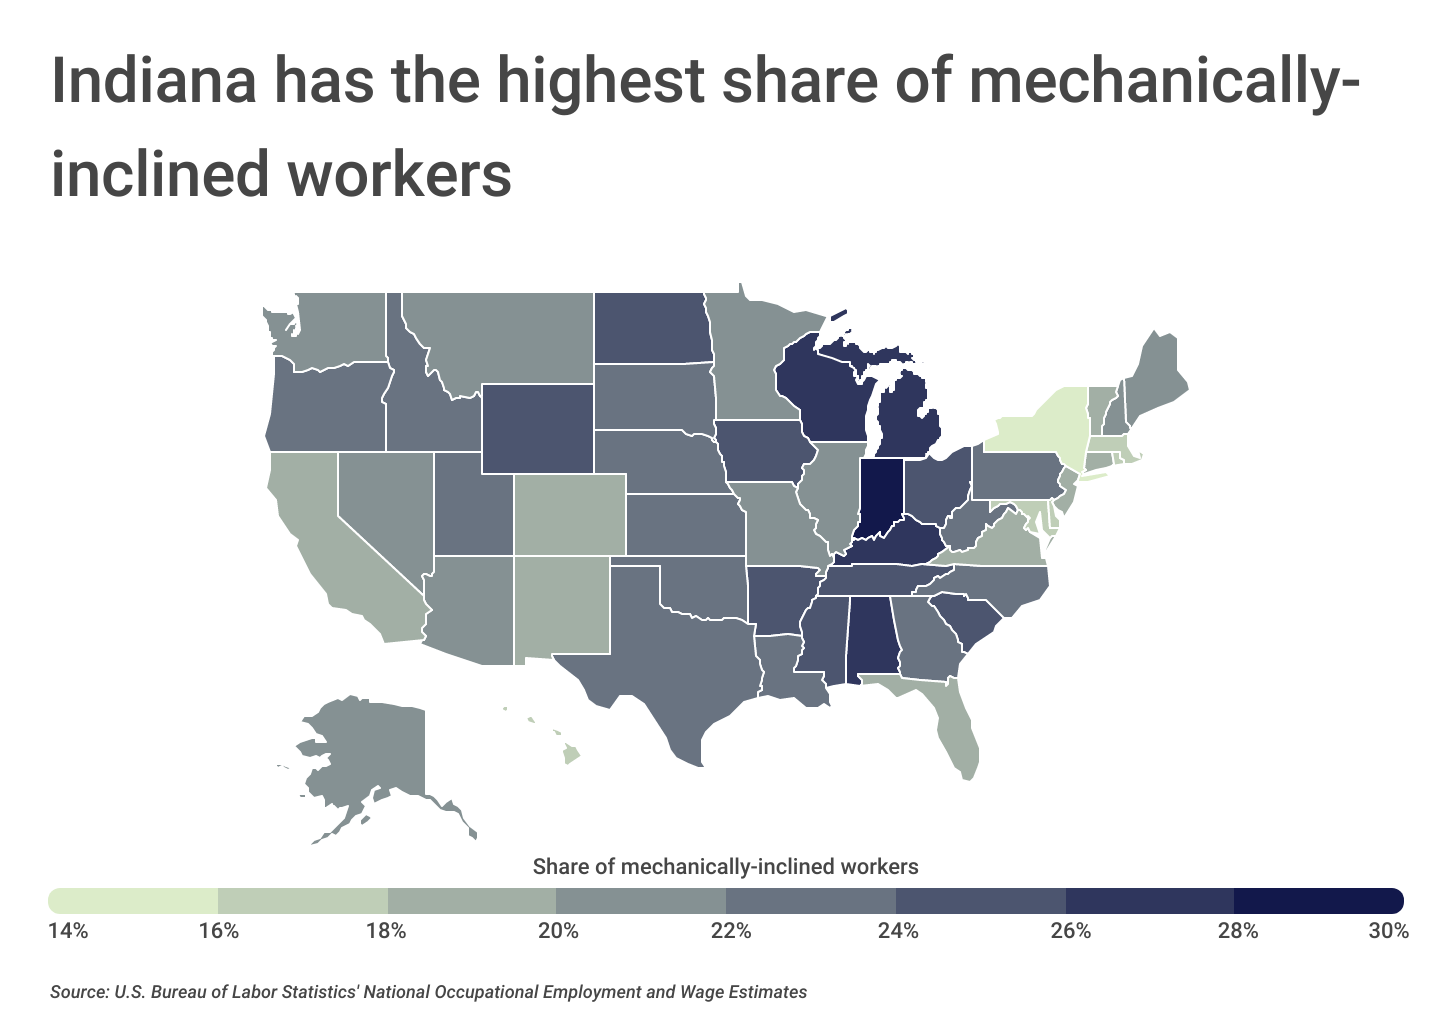 Chart3_Indiana has the highest share of mechanically-inclined workers